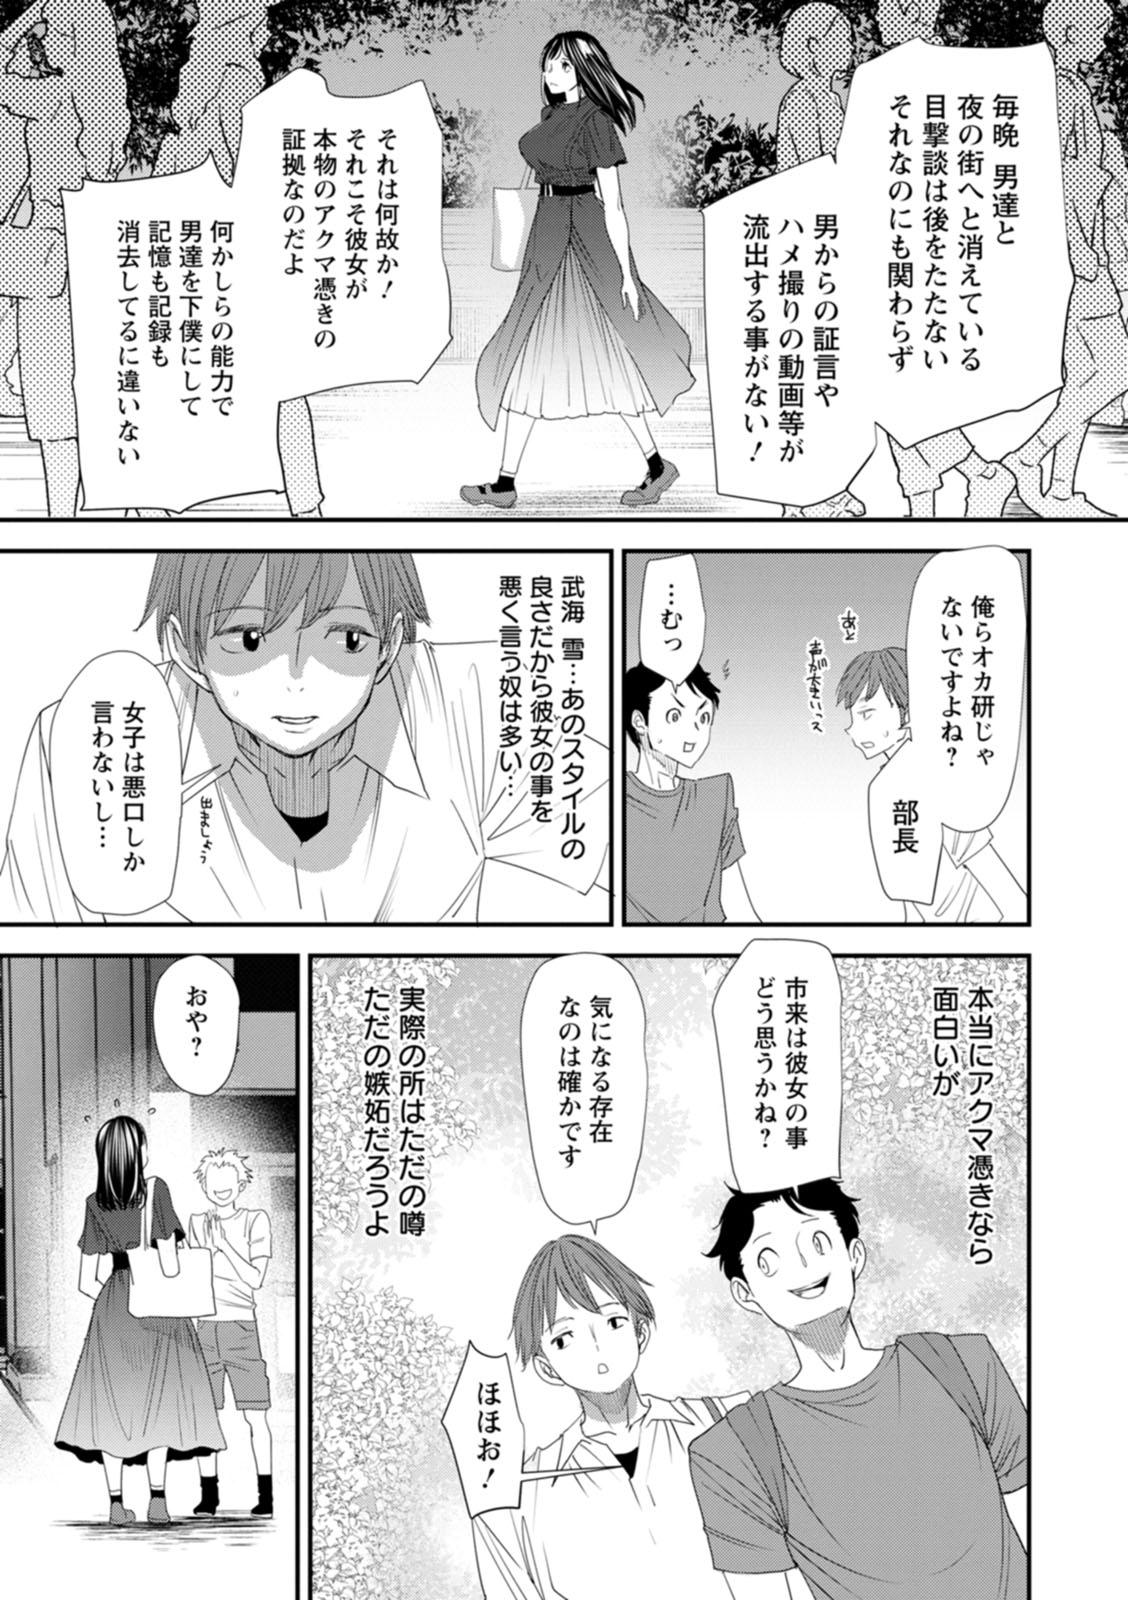 Pau Inma Joshi Daisei no Yuuutsu - The Melancholy of the Succubus who is a college student Celebrity Nudes - Page 11